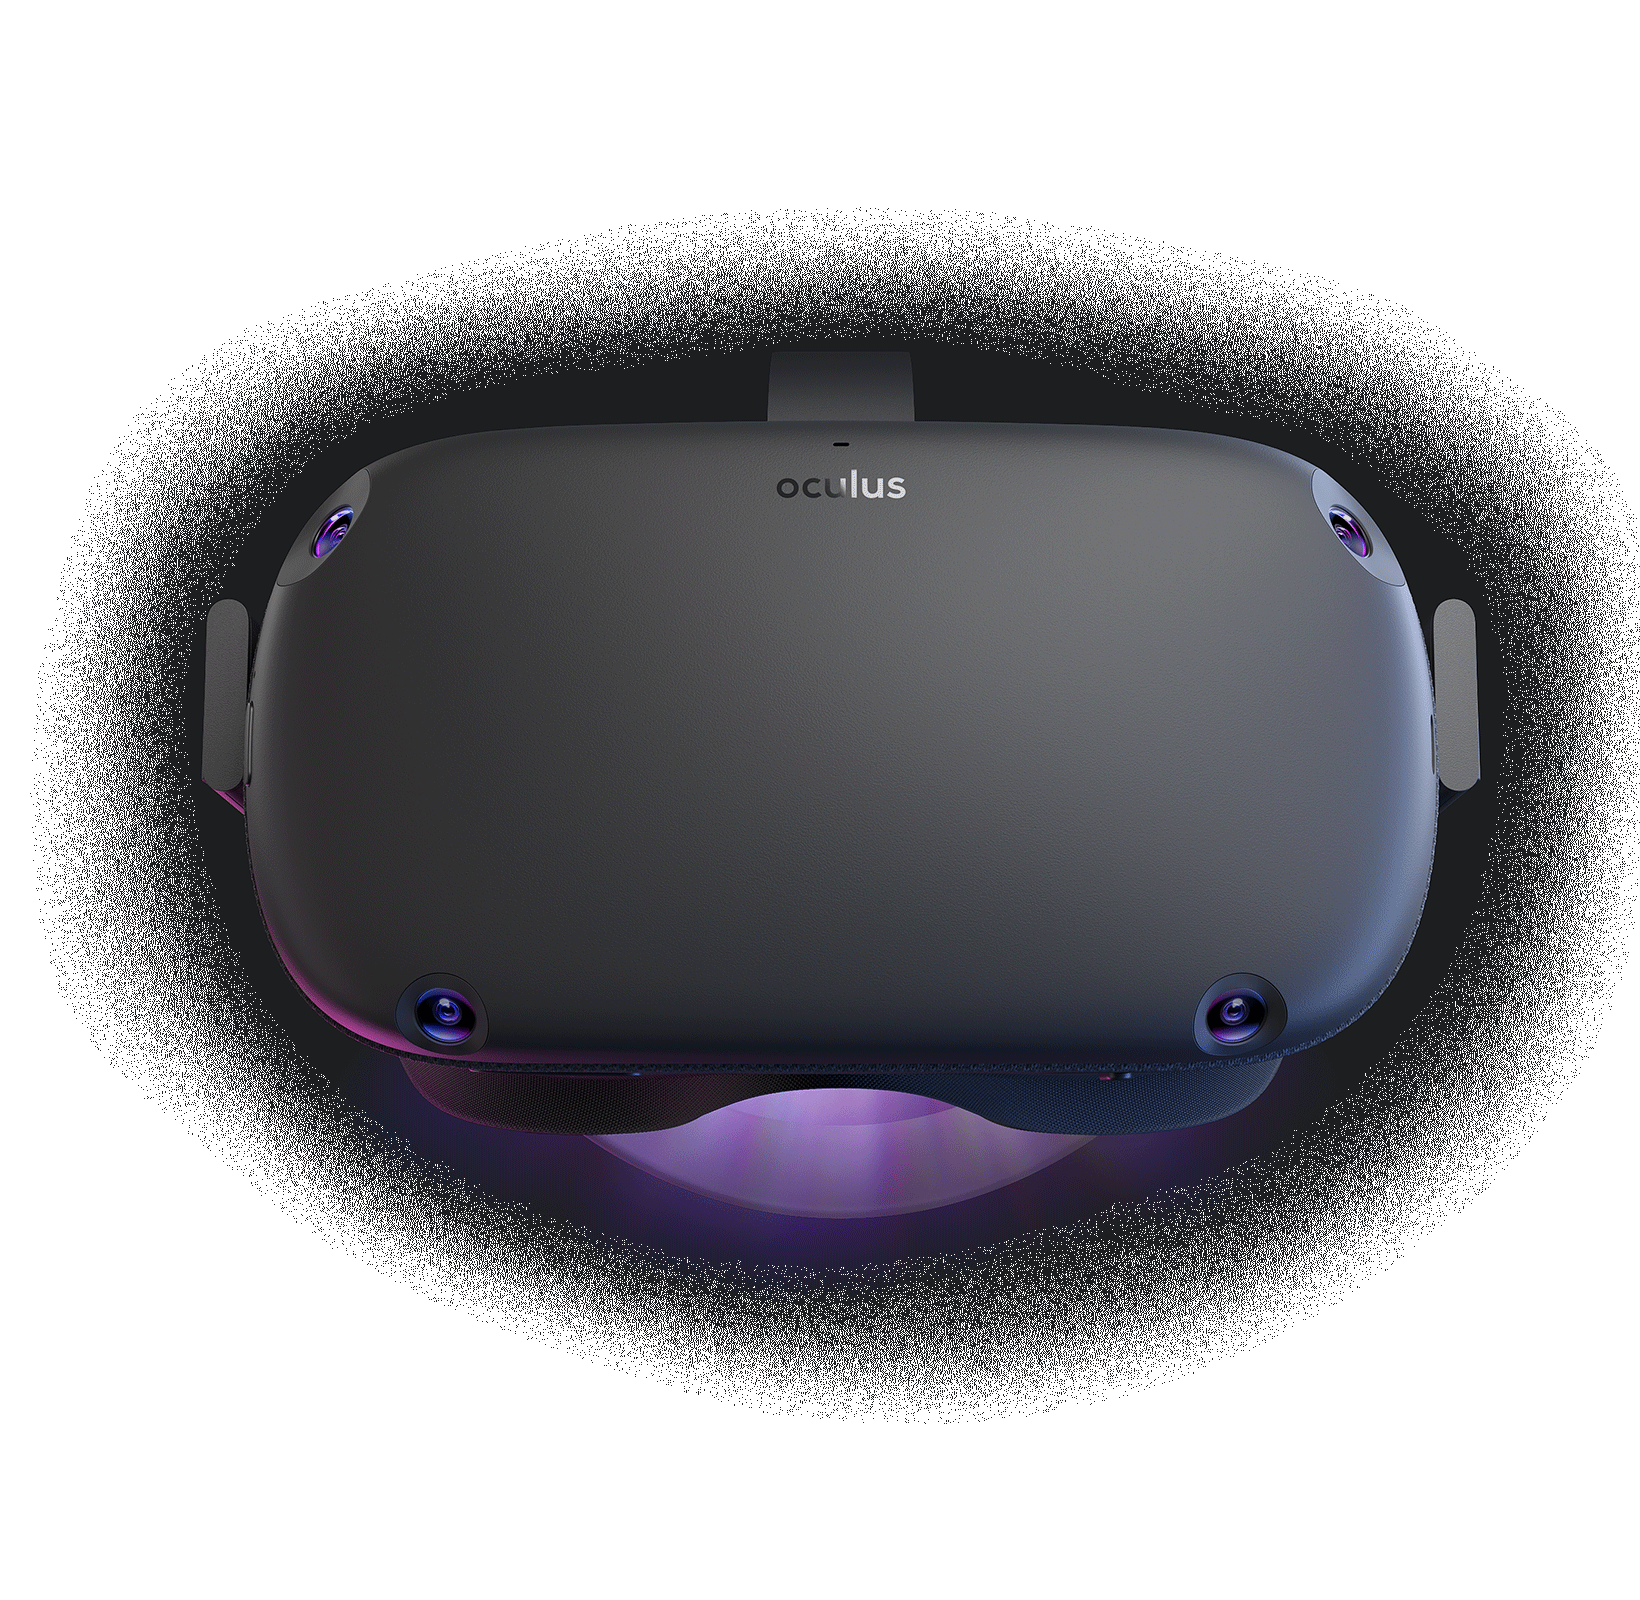 Oculus Quest now available, starts at $399 for a 64GB set ...